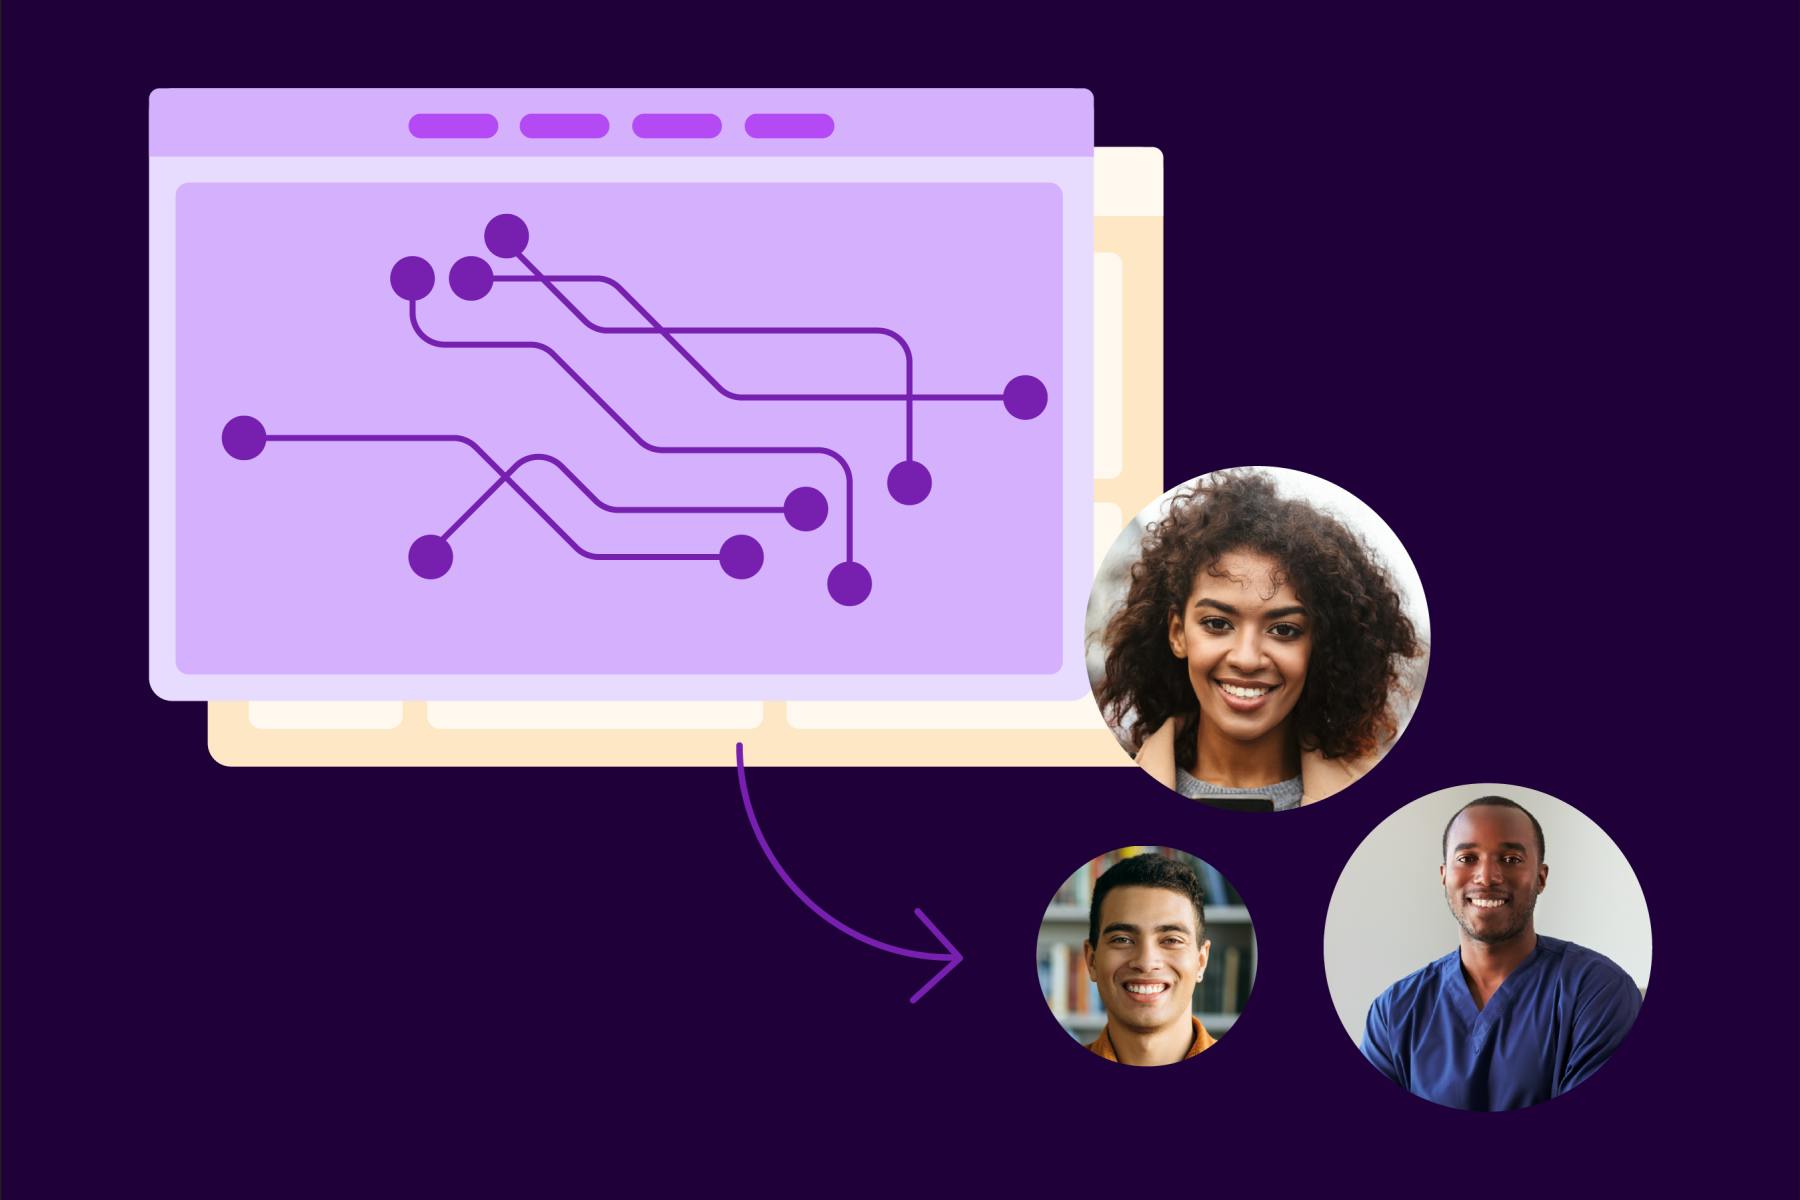 A light purple abstract illustration of neural wiring to represent AI points to three circles with headshots of people on a dark purple background